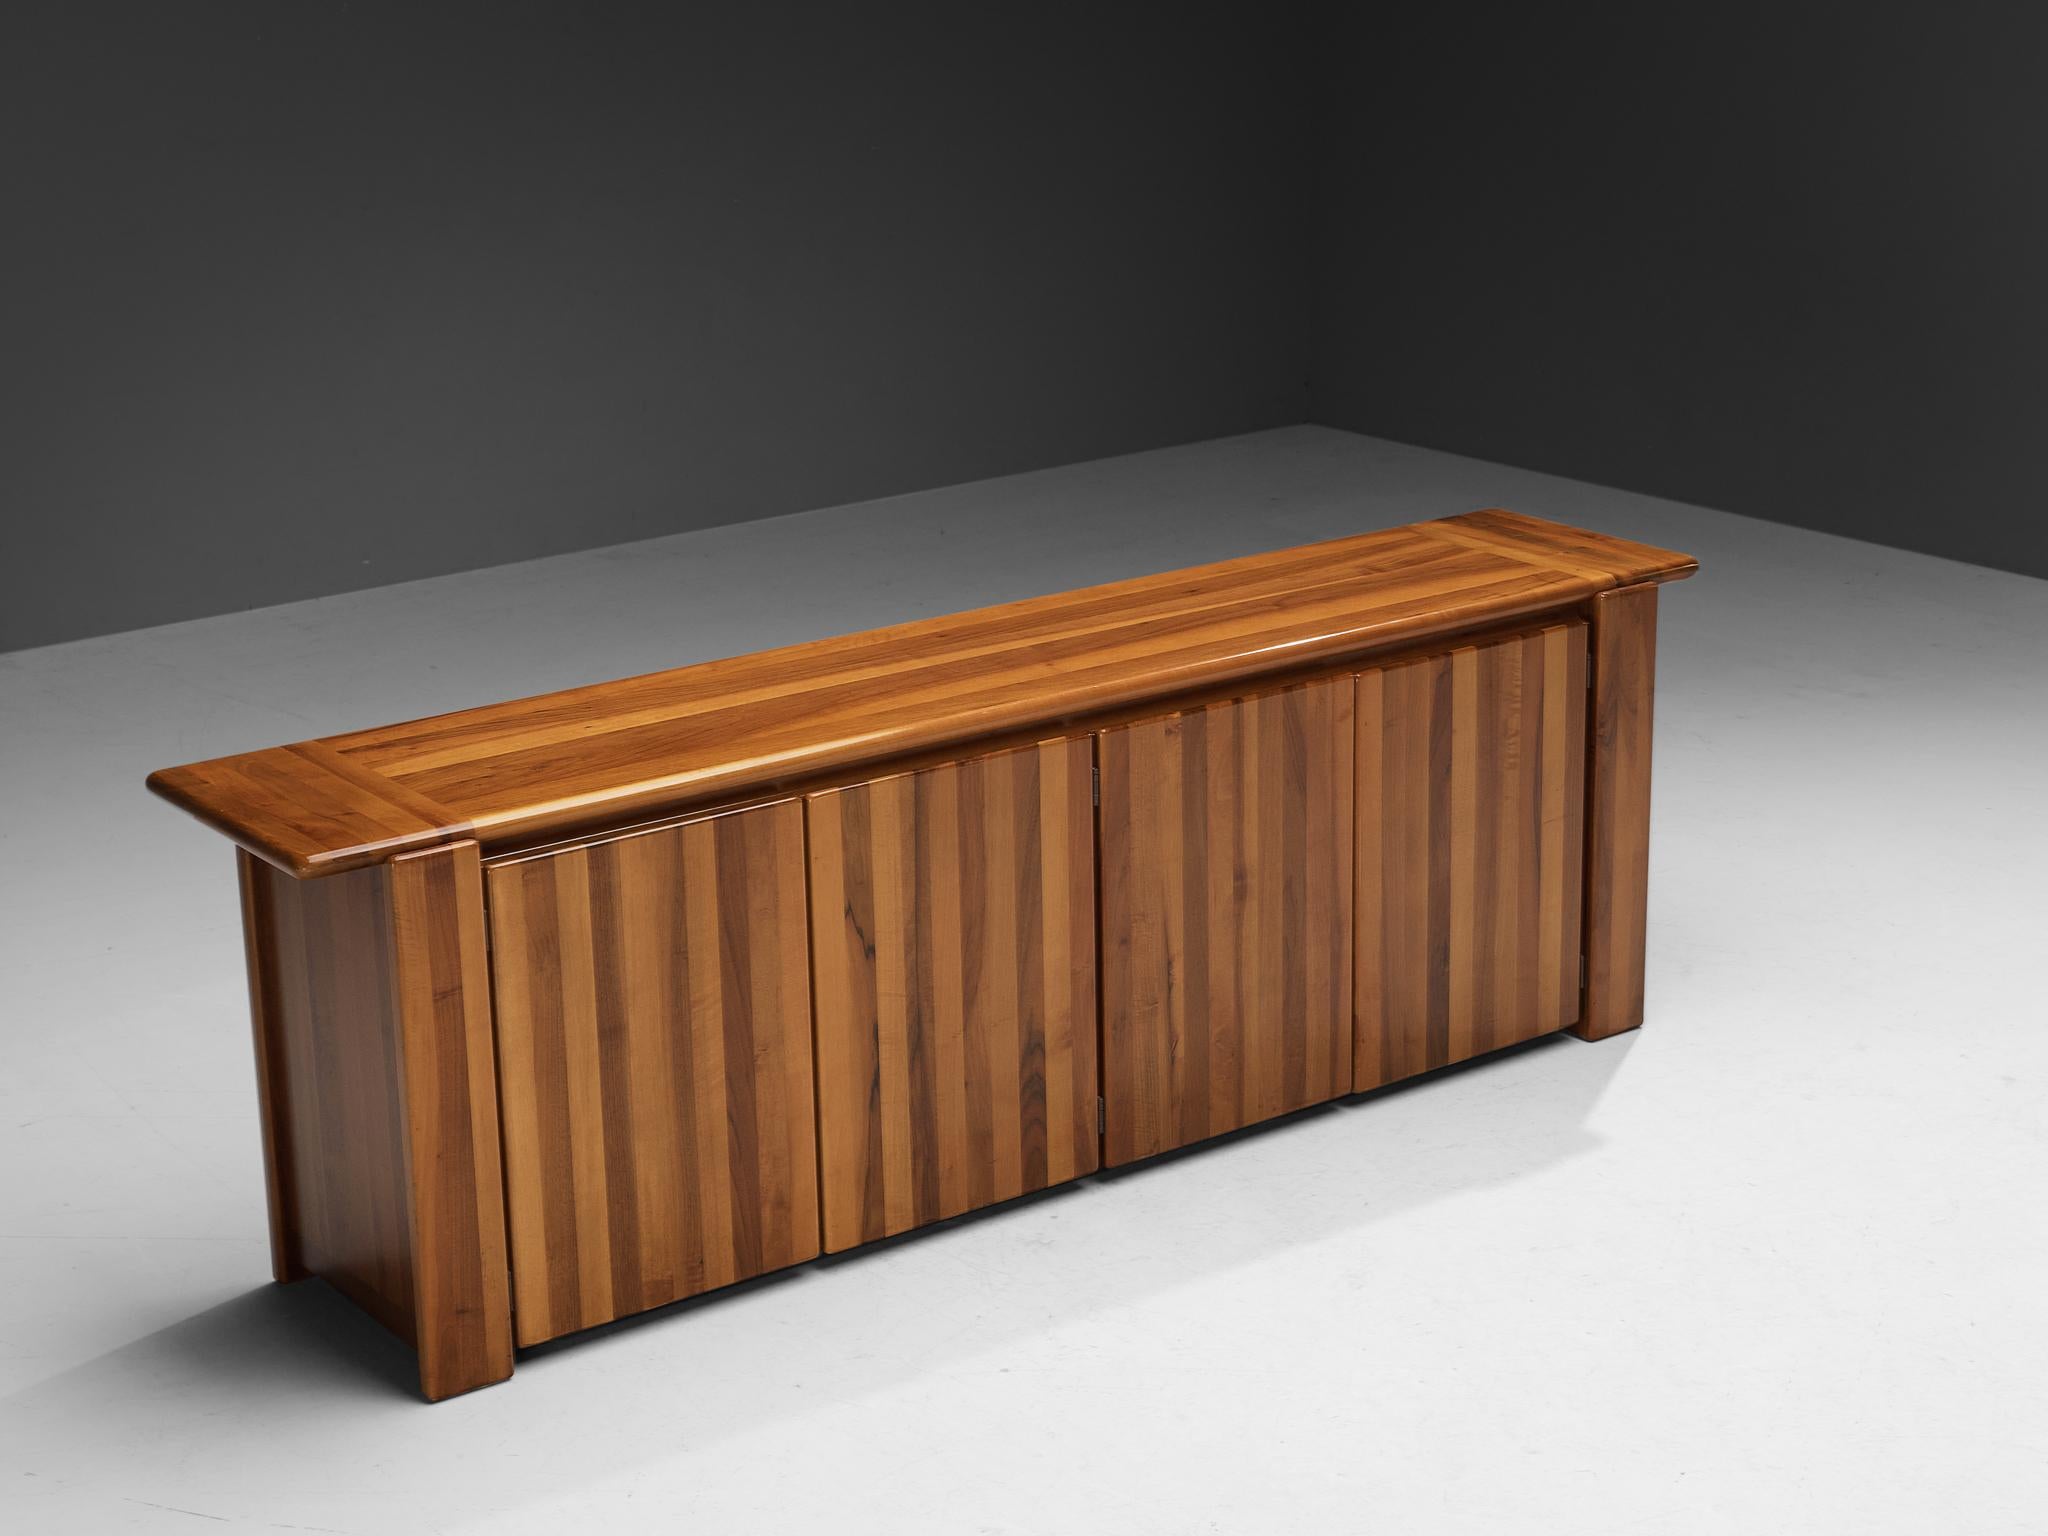 Mario Marenco for Mobil Girgi, sideboard model 'Sapporo', walnut, Italy, 1970s

An exceptional credenza by the Italian designer and actor Mario Marenco (1933-2019), featuring a high-level of craftsmanship in woodwork. The whole construction is